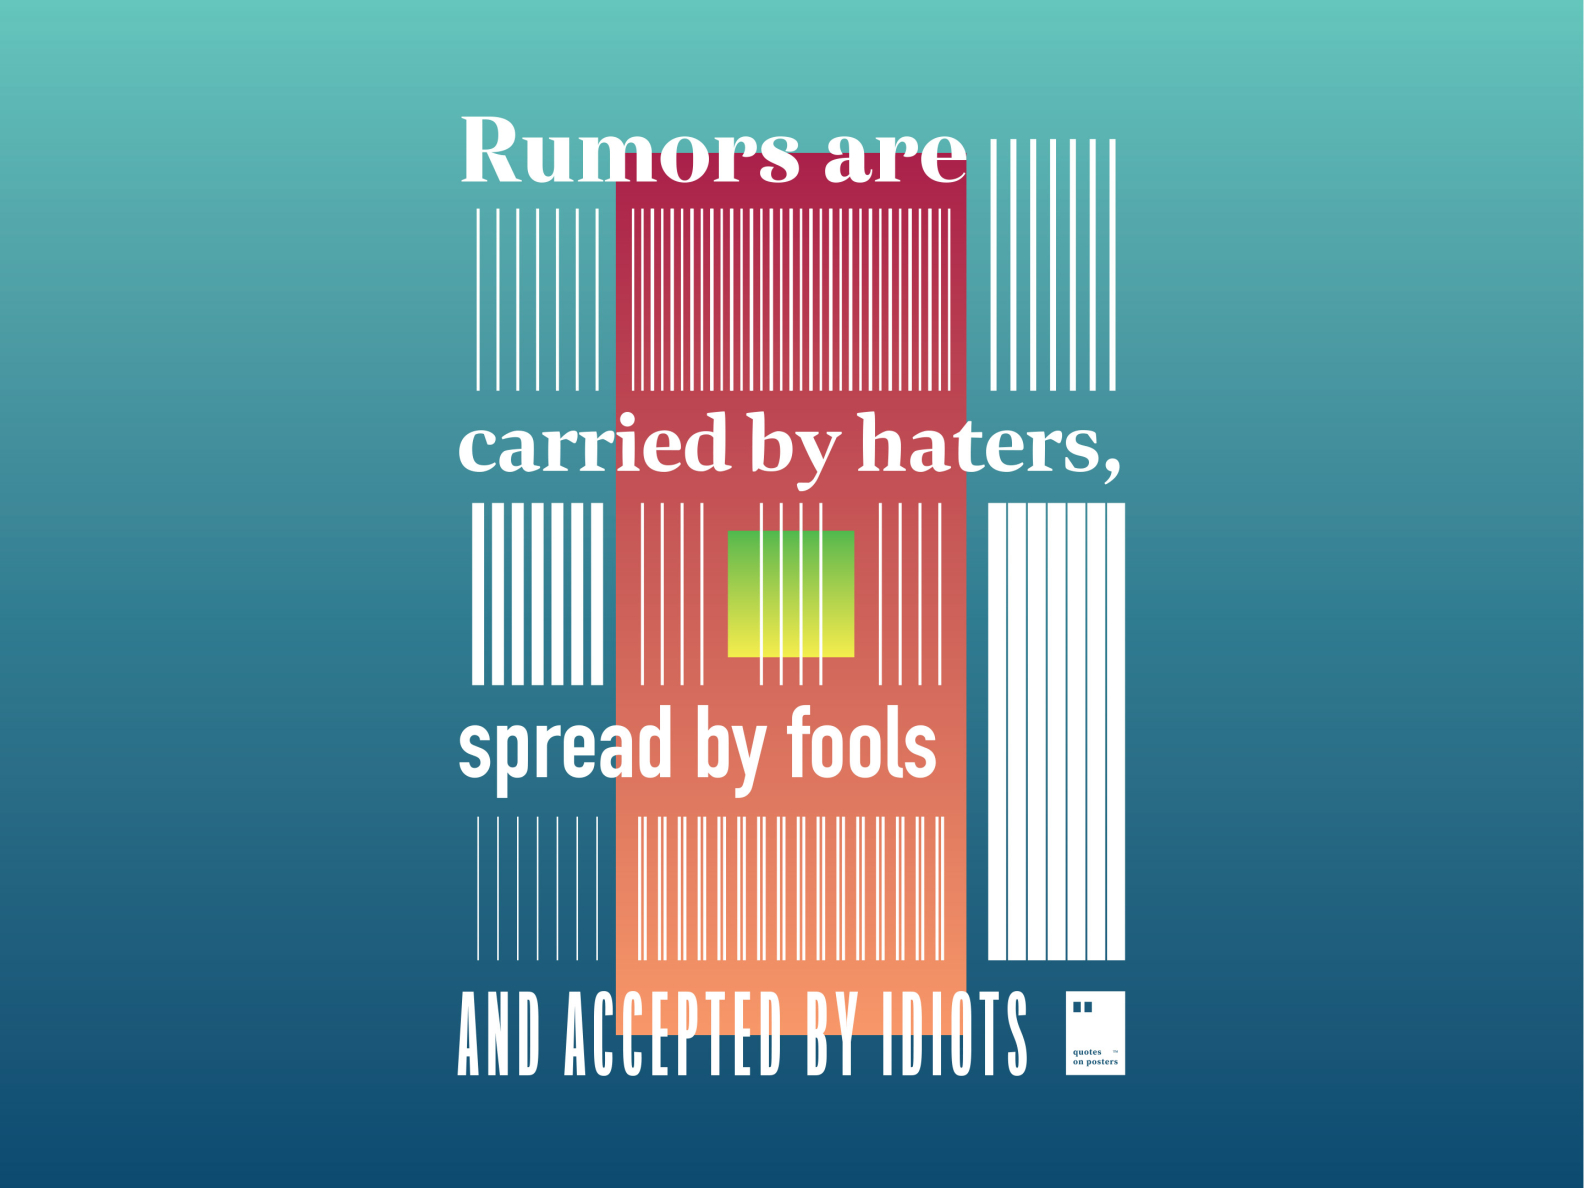 quotes about rumors and haters